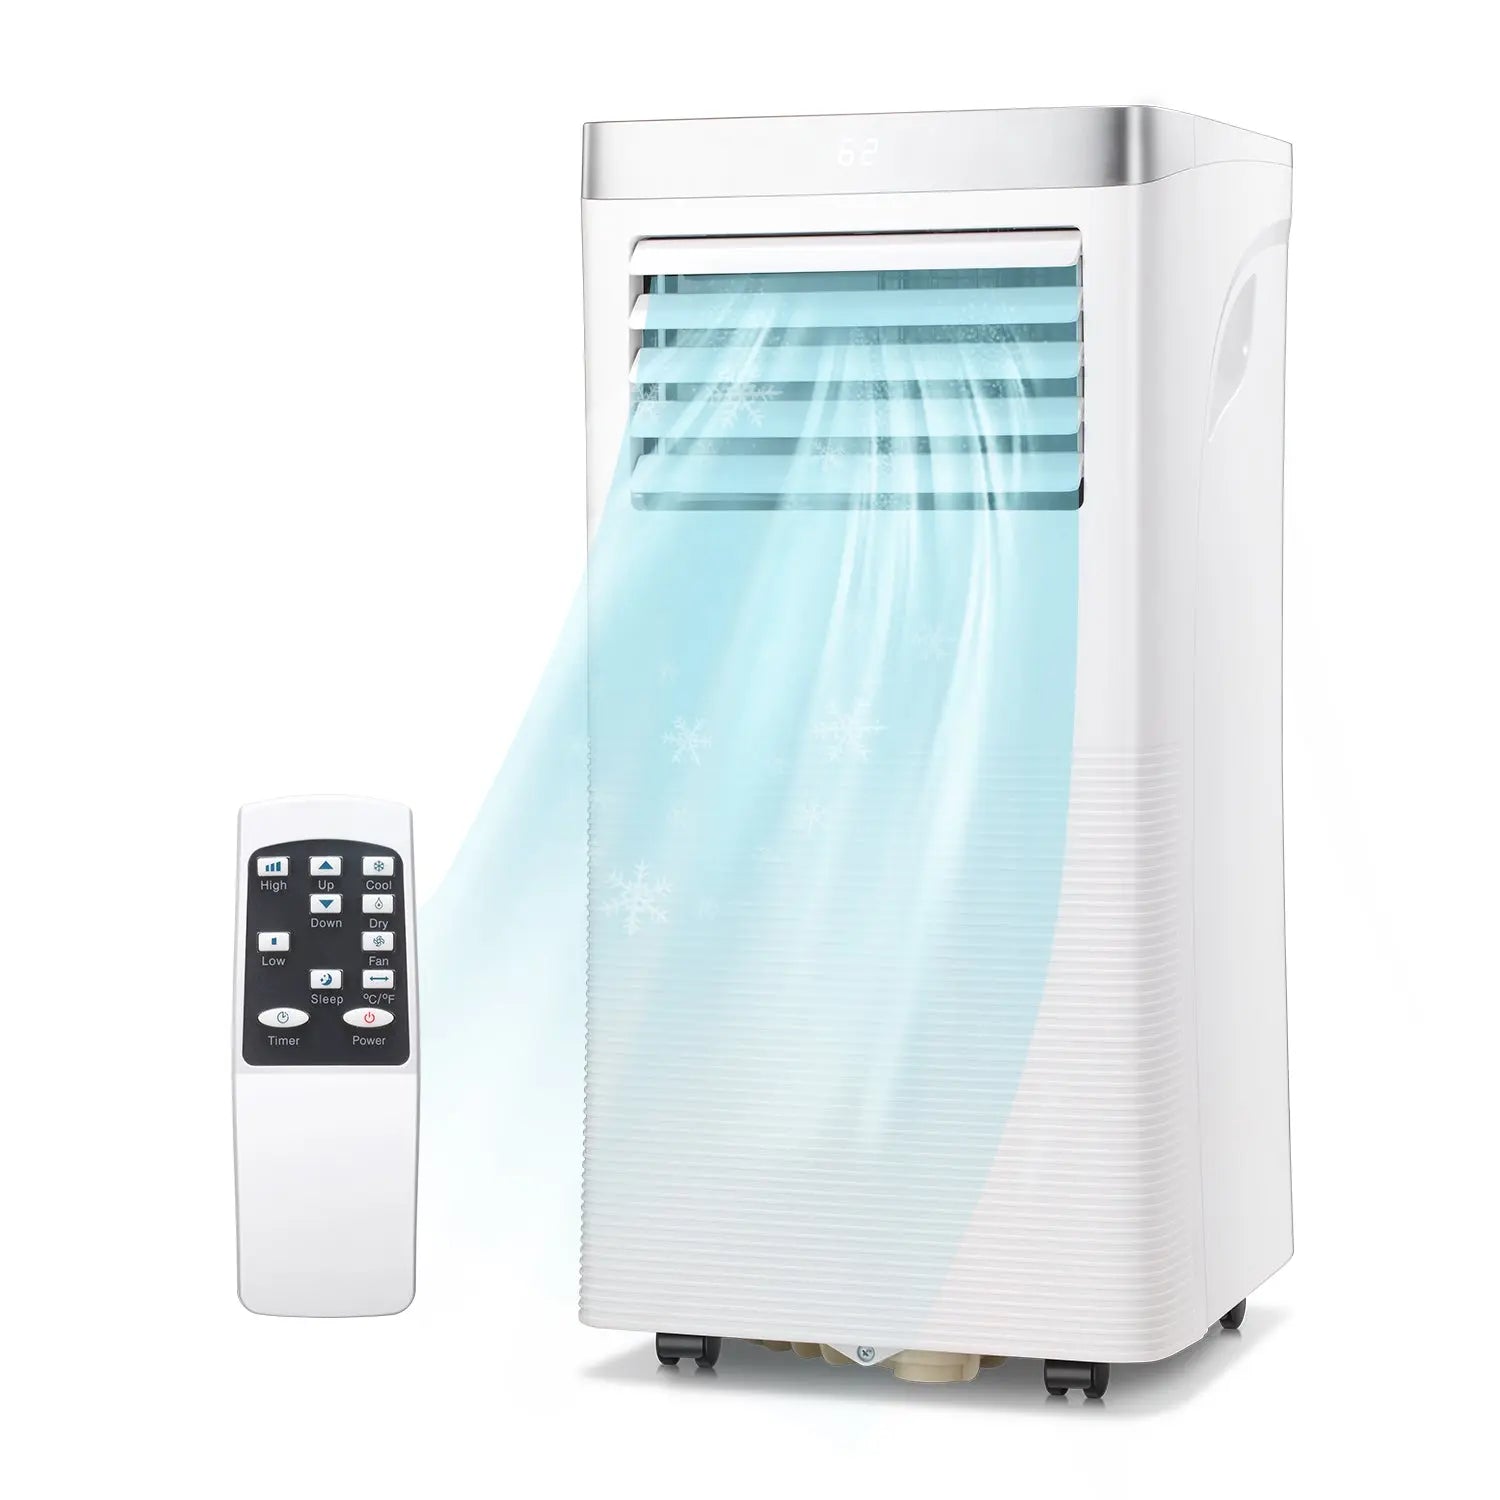 R.W.Flame Electric Portable Air Conditioner Remote Control, 3-in-1,Ventilation and Dehumidification function